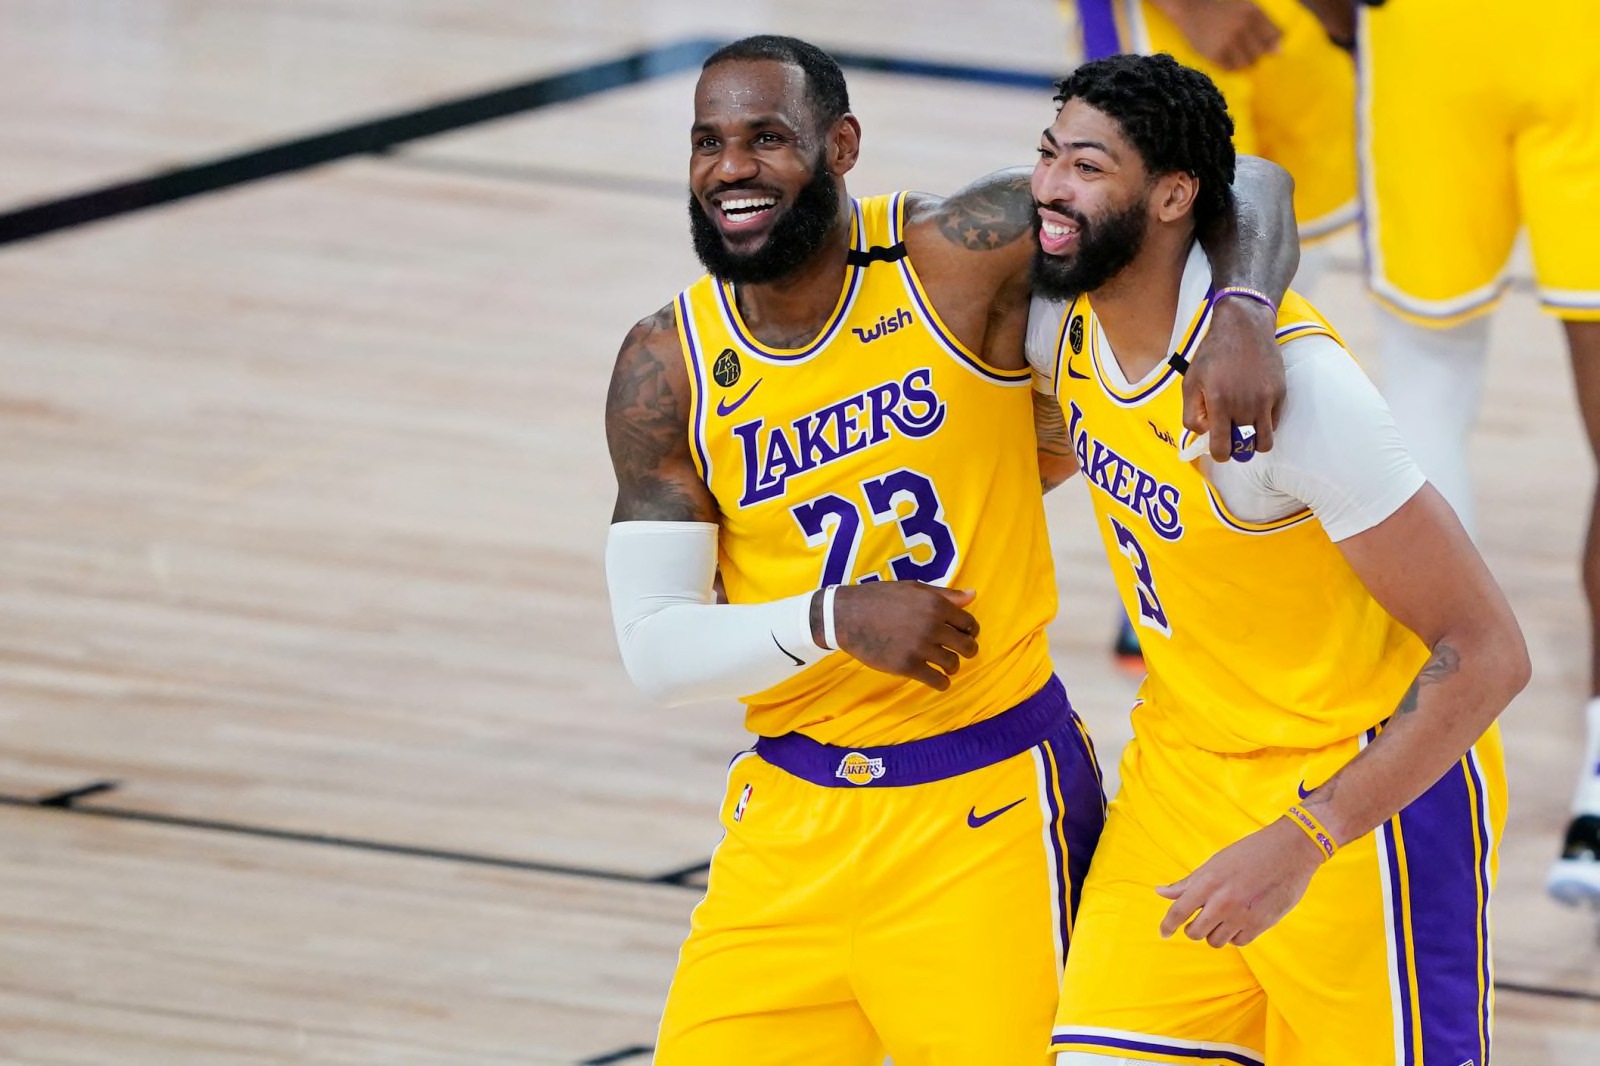 lakers finals 2020 jersey